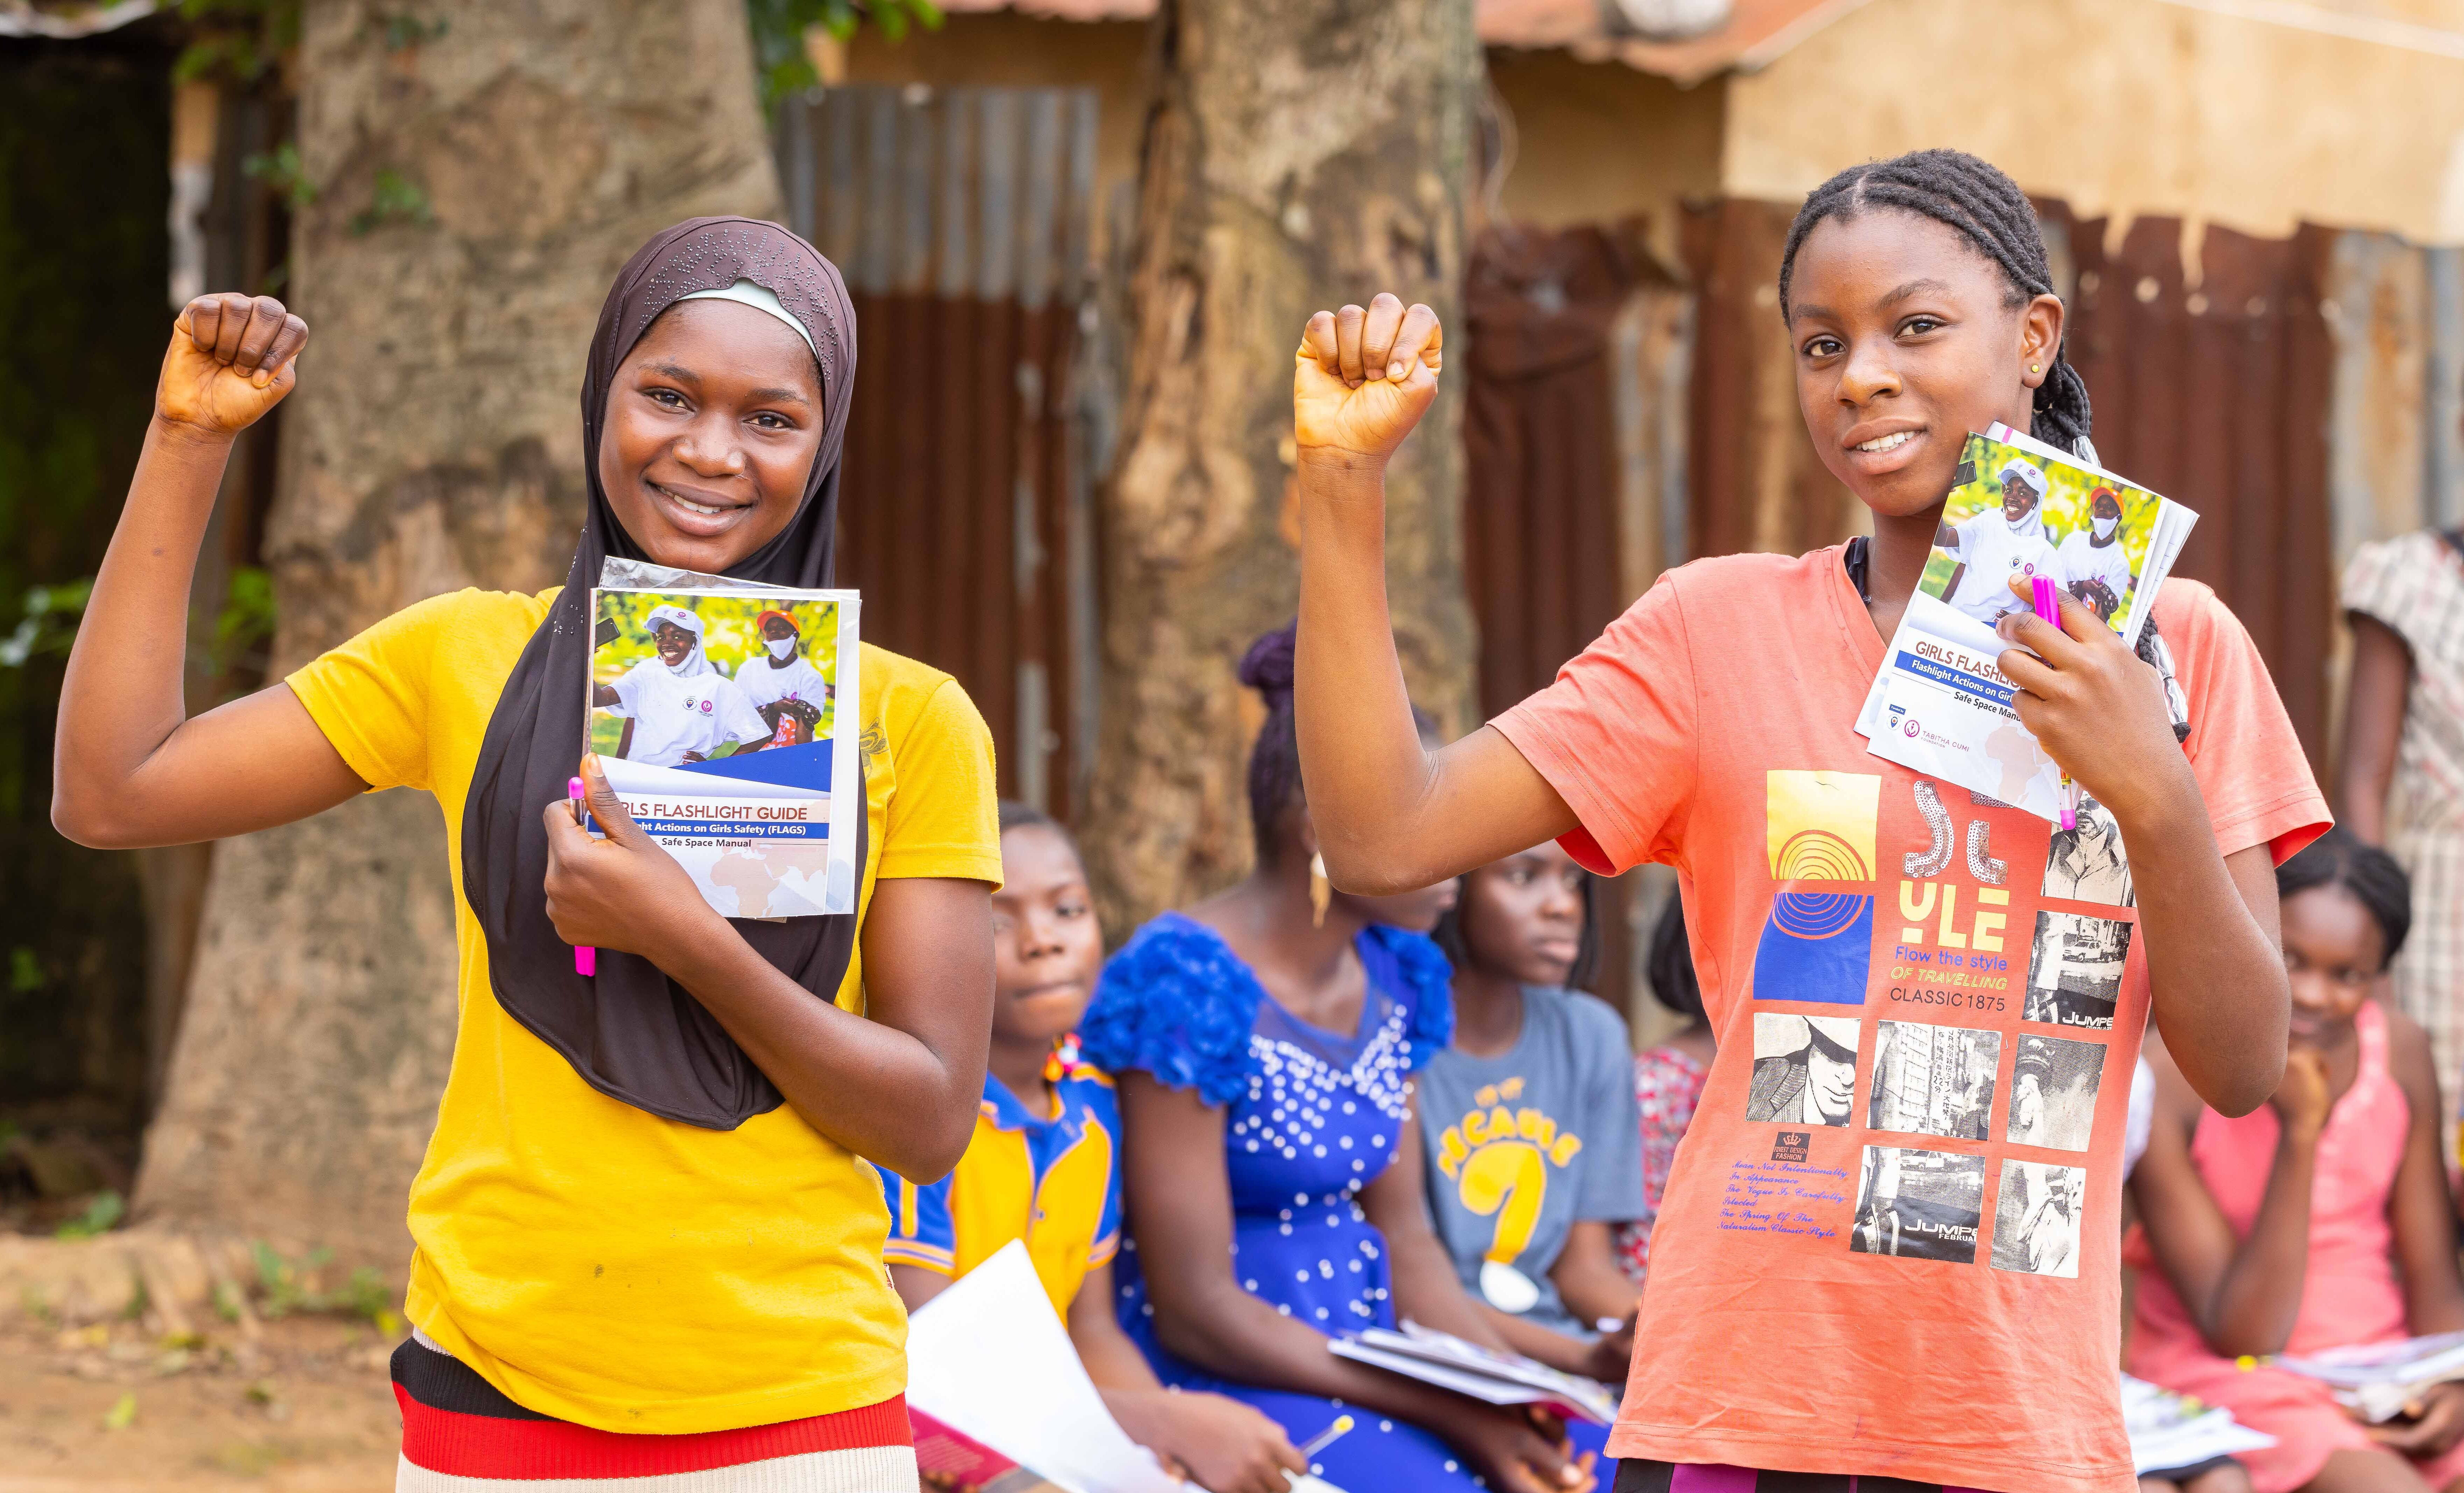 Two young black girls are raising their fist while holding up a flyer with the other hand. One is wearing a yellow t-shirt, the other one is wearing an orange t-shirt. They are smiling at the camera and standing outside.